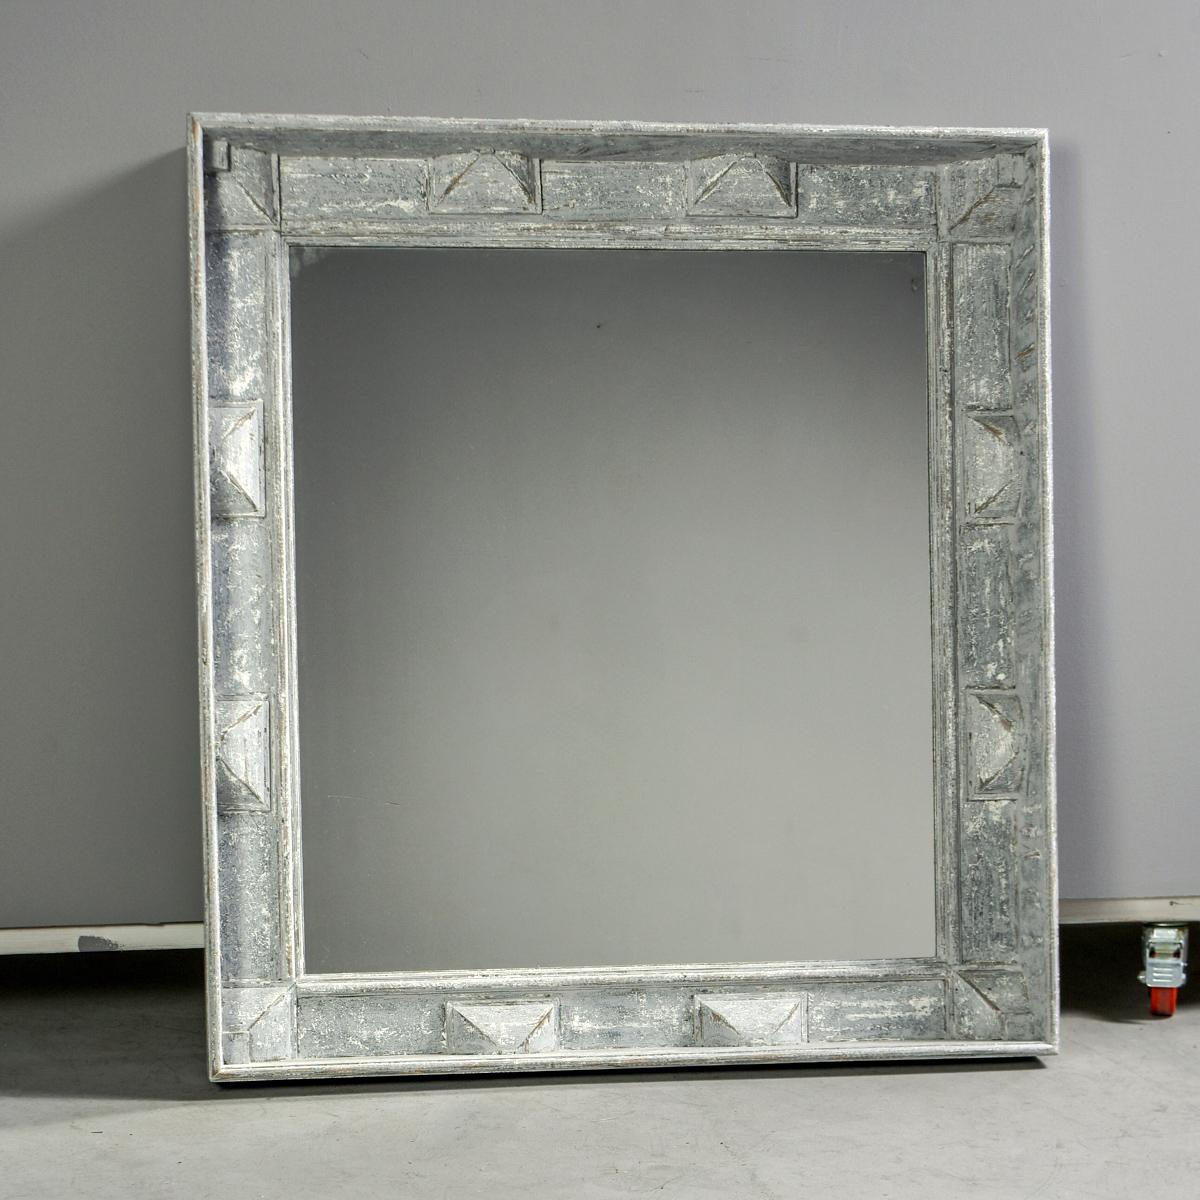 Large European square mirror with painted wood frame, circa 2010. Frame is deep set with decorative details in relief and blue gray paint. Looks Swedish but maker is unknown. 


Measures: Mirror: 34.5” H x 31” W.